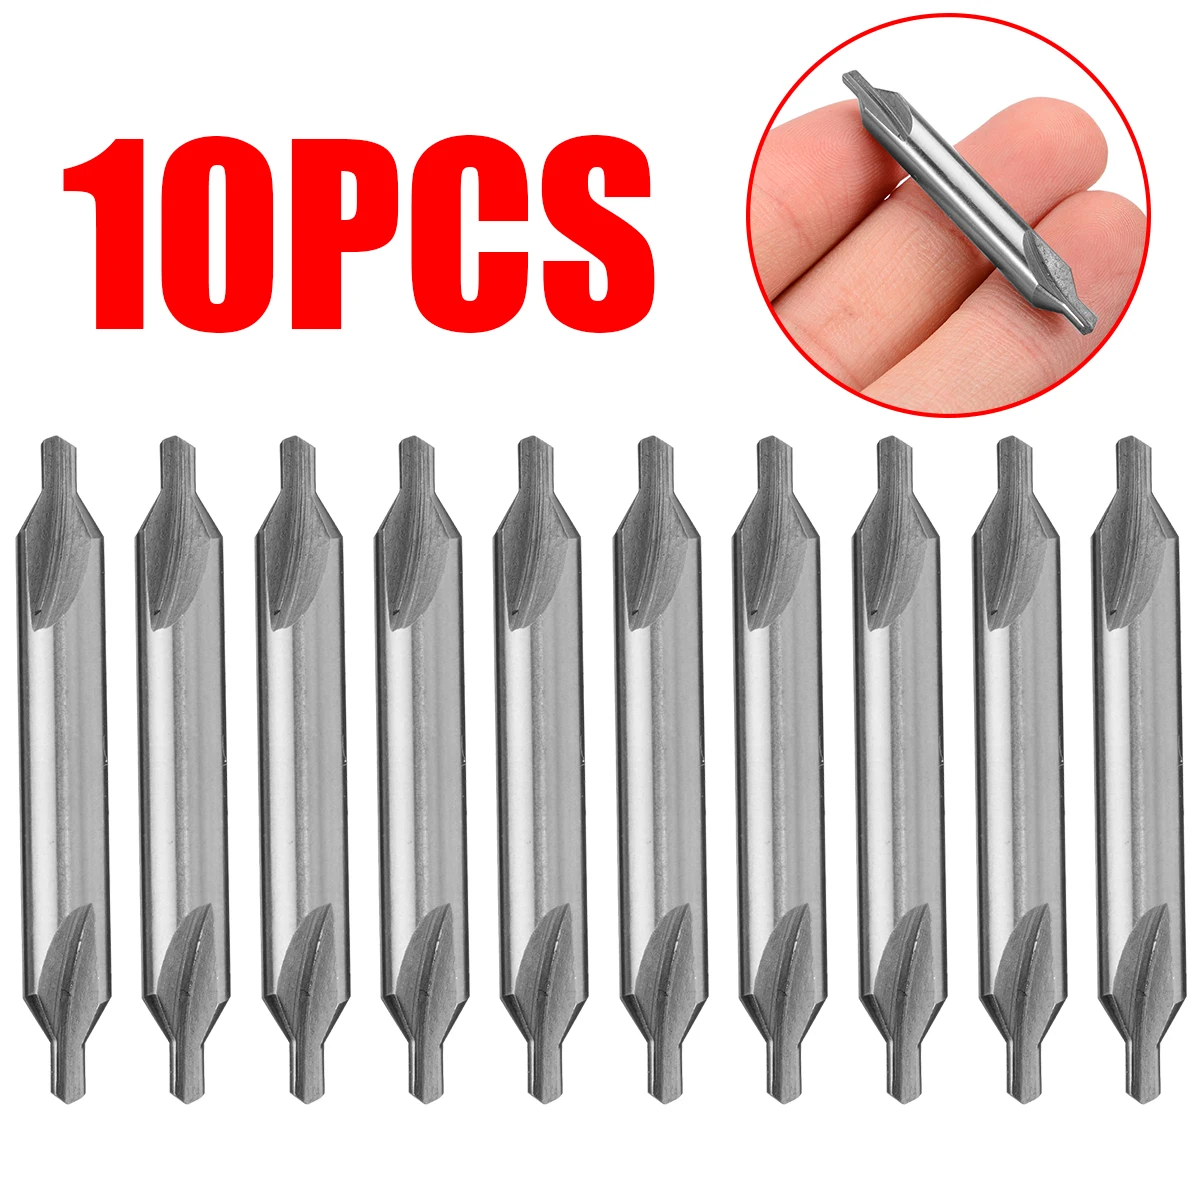 10pcs 2.5mm High Speed Steel Center Drill Countersinks 60 Degree Combined Drill for Machining Hole